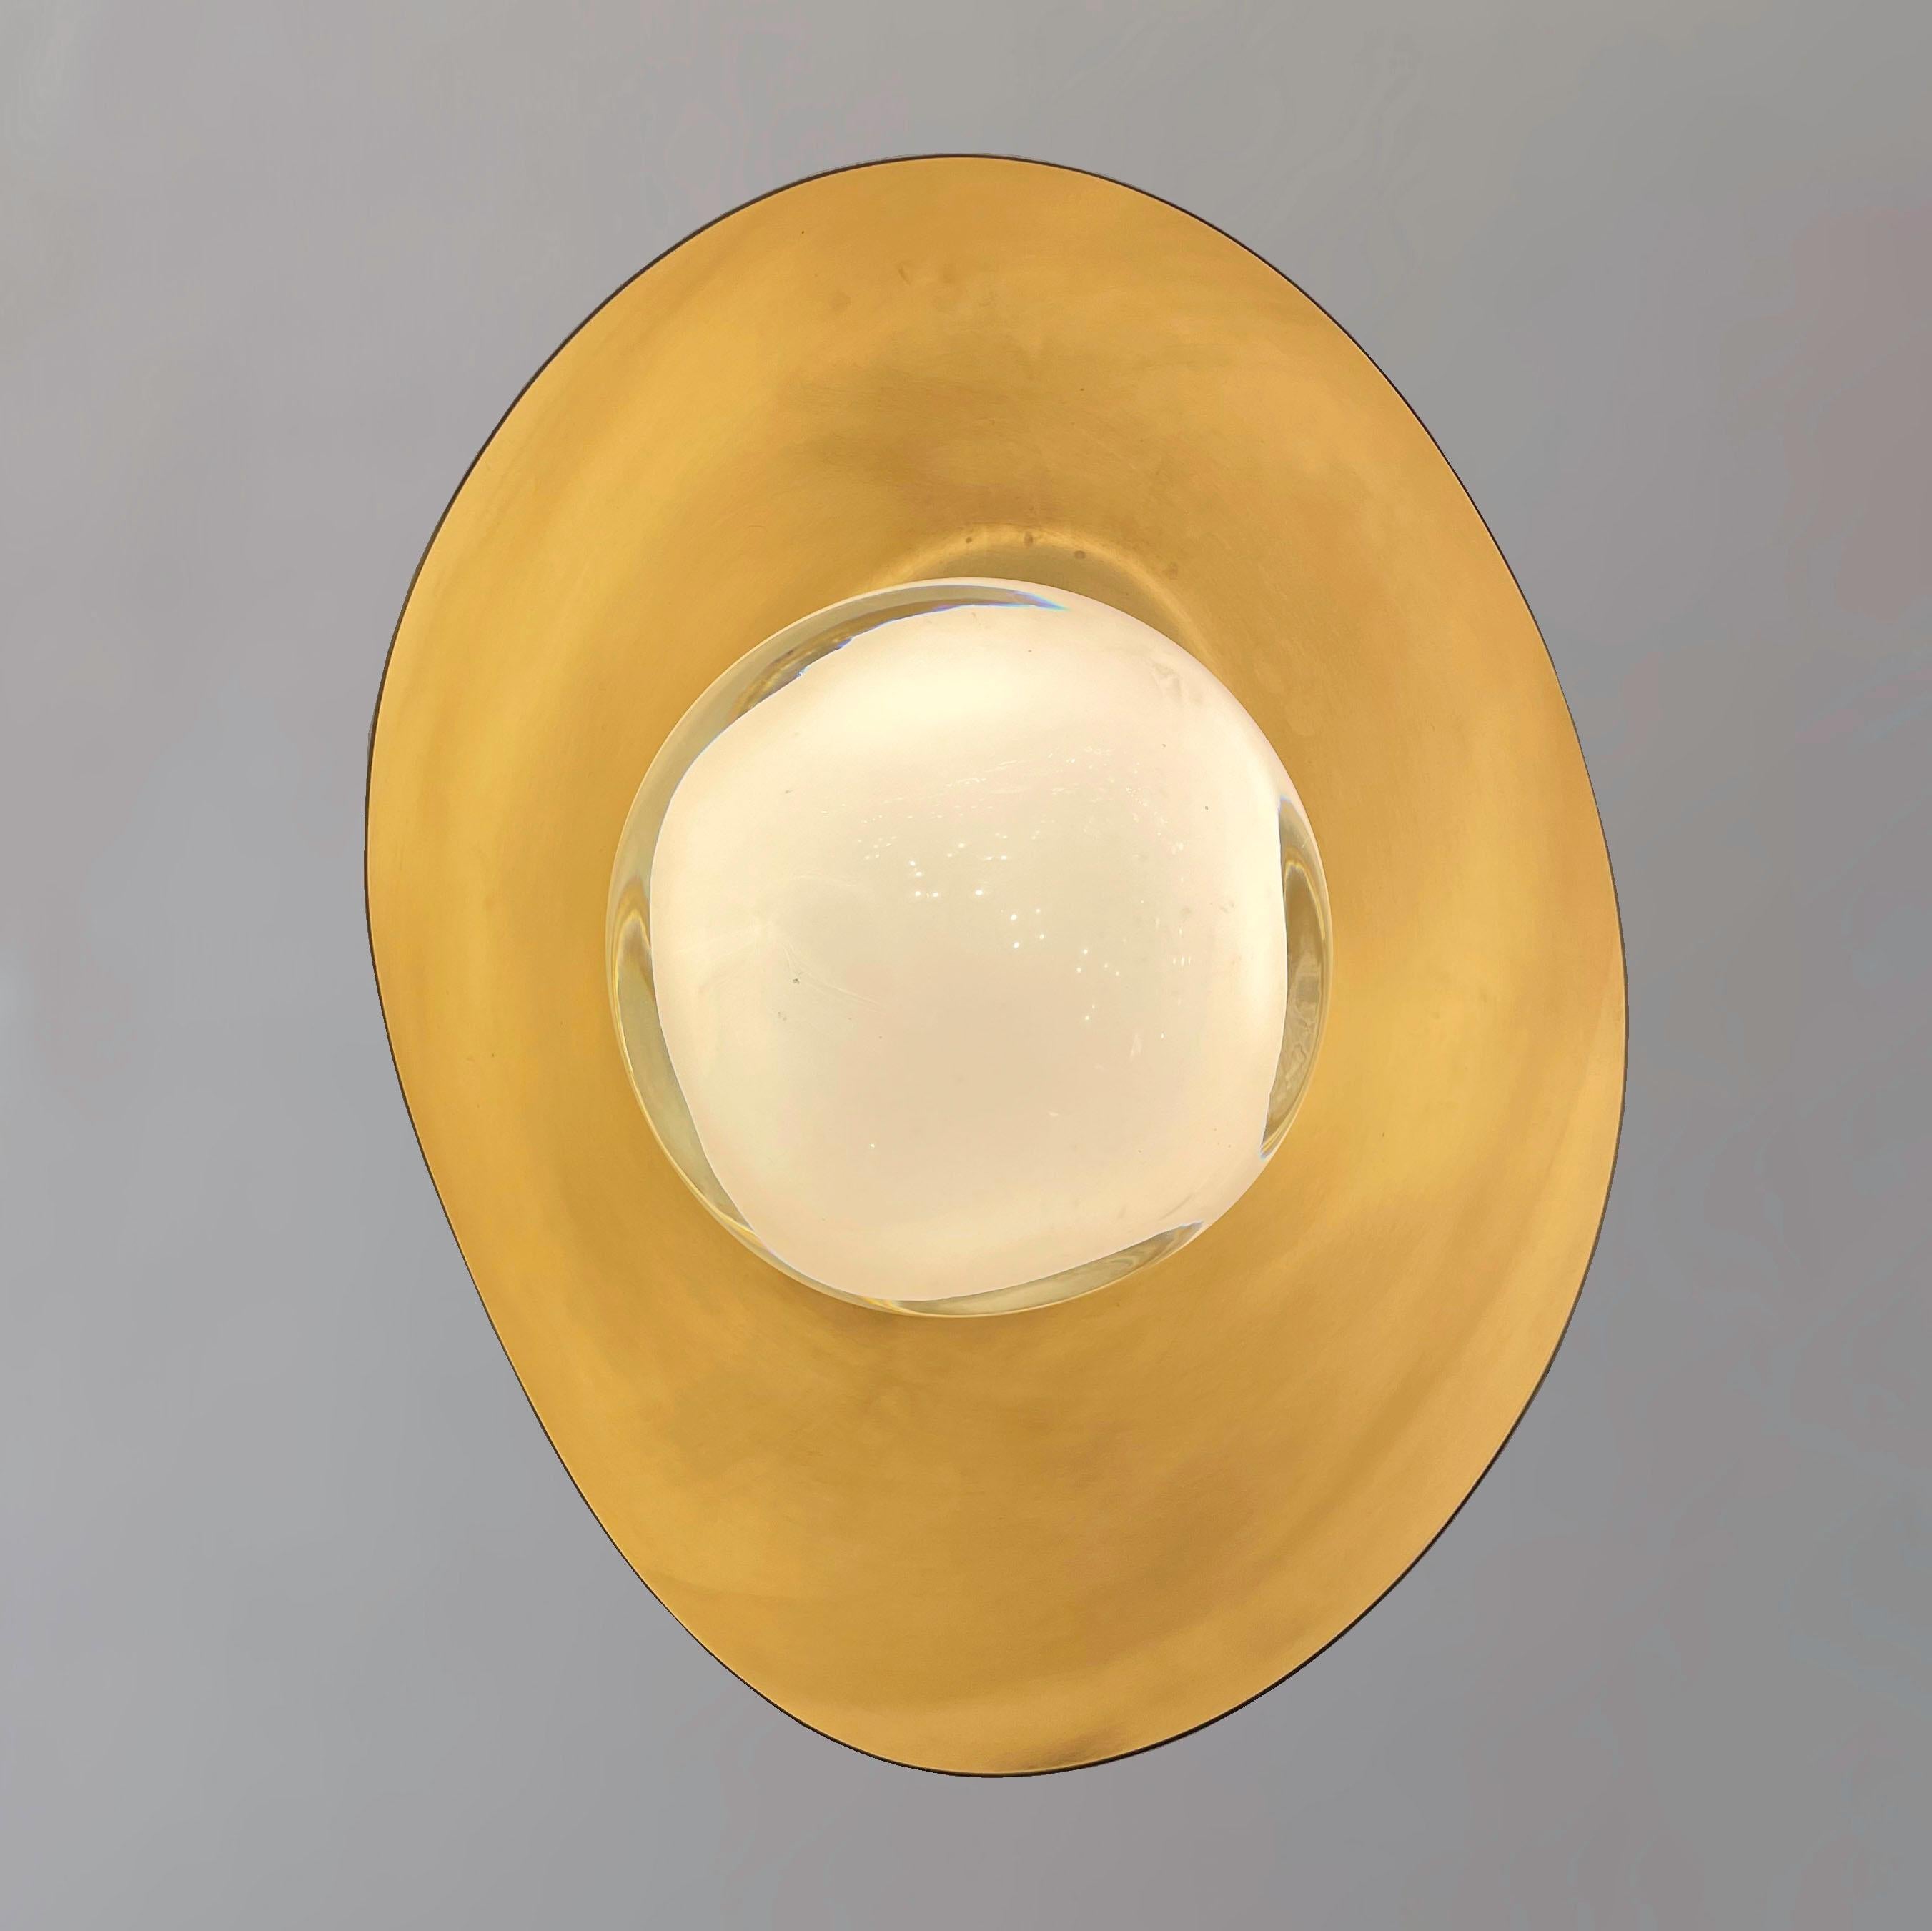 Perla Wall Light by Gaspare Asaro-Satin Brass/Polished Nickel Finish In New Condition For Sale In New York, NY